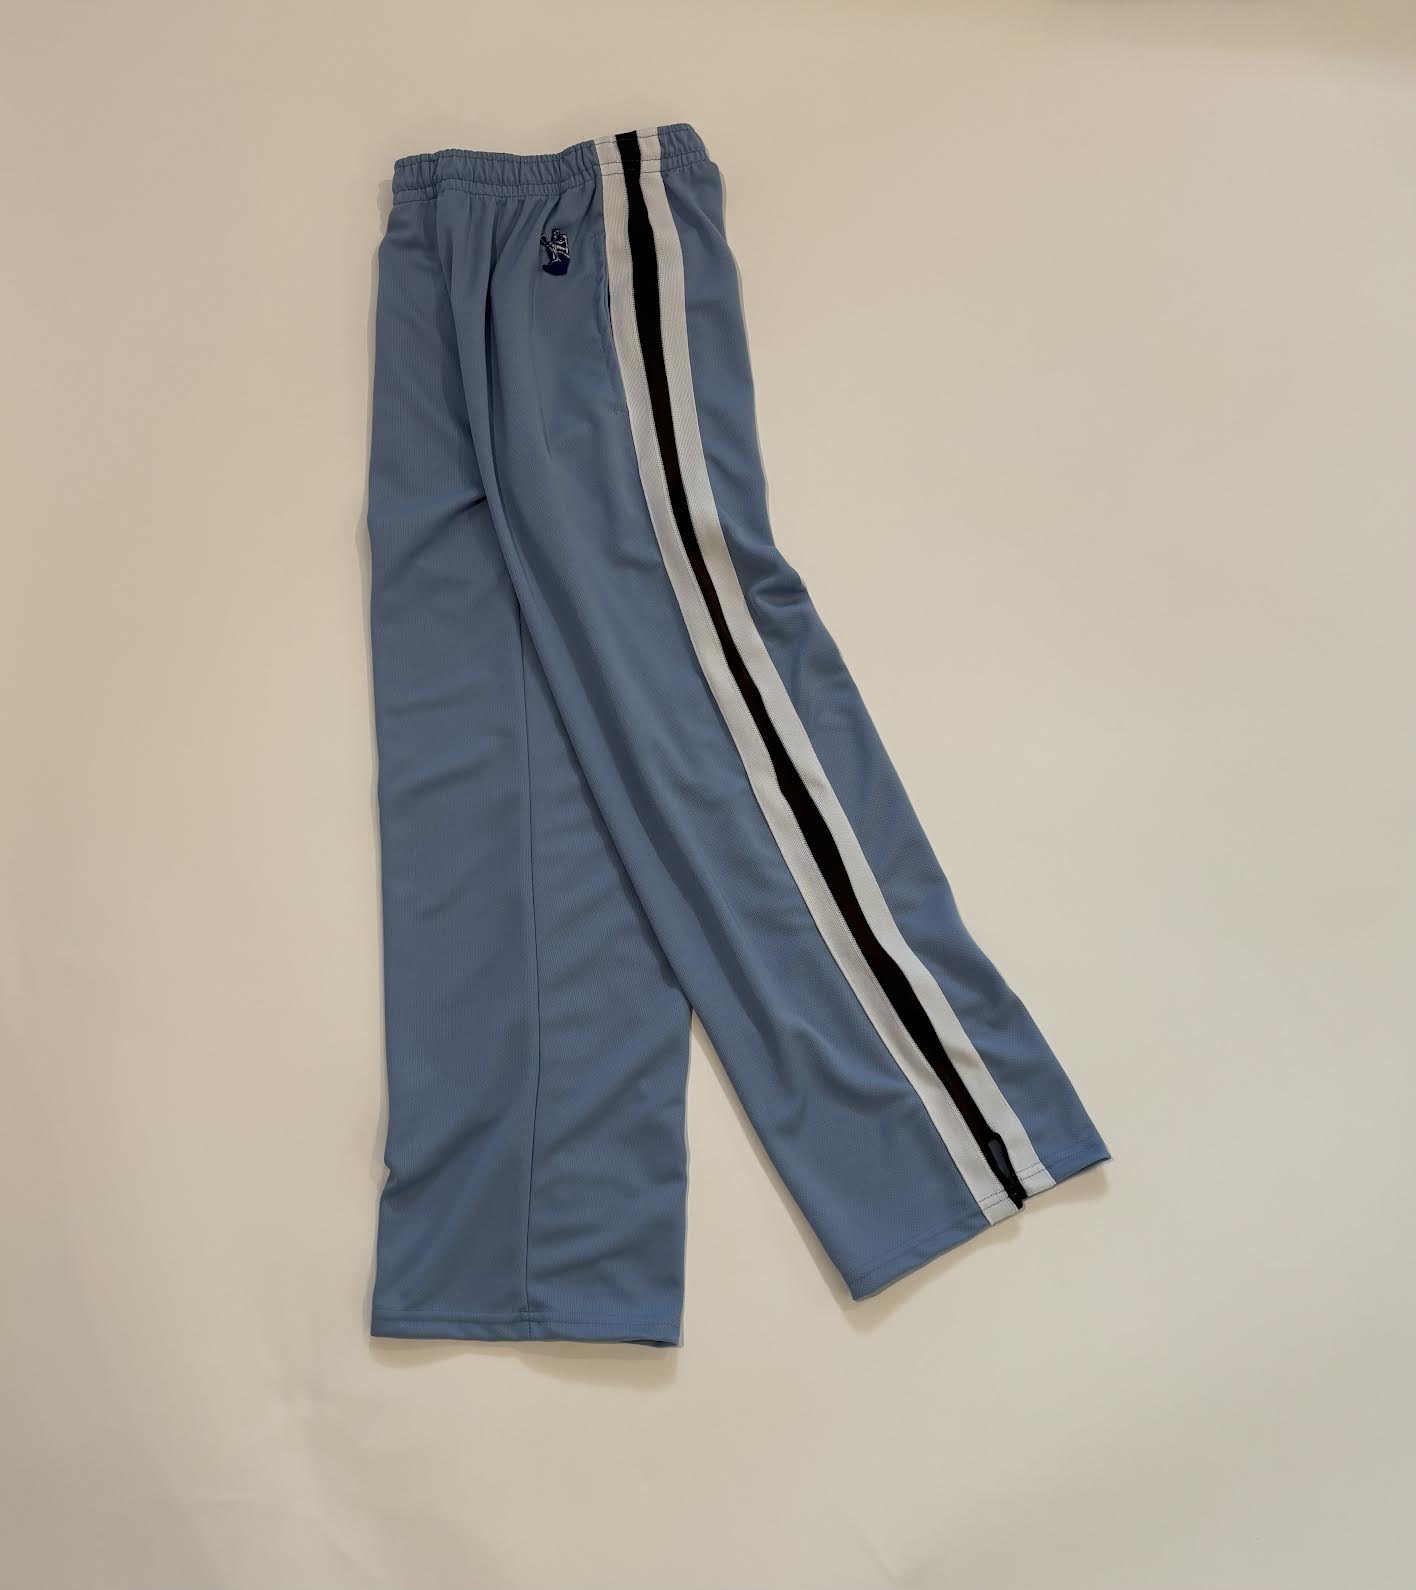 SUMMER LAX PANT in Light Blue LITE WEIGHT Miracle Mesh* w/ White, Brown, White Knit Stripes